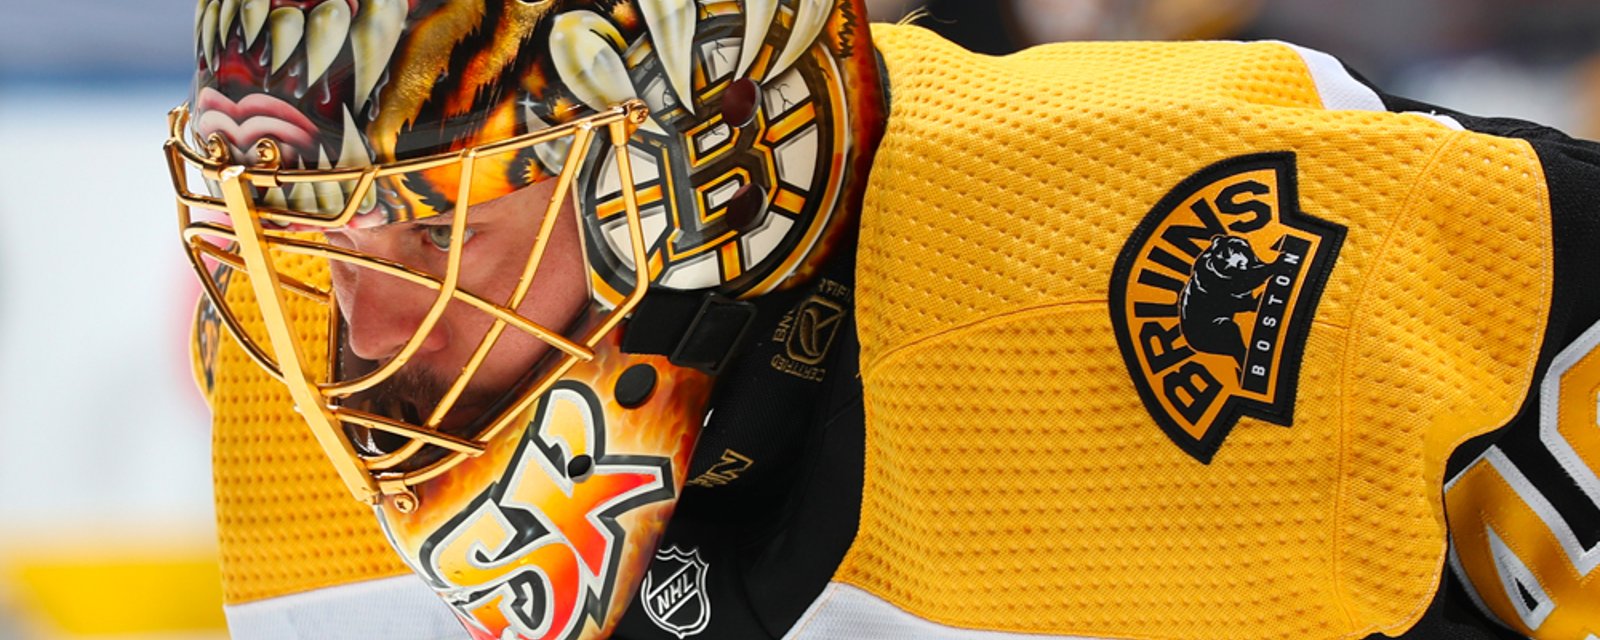 Rask breaks his silence on trade rumors says, “I don't want to play for anybody else”